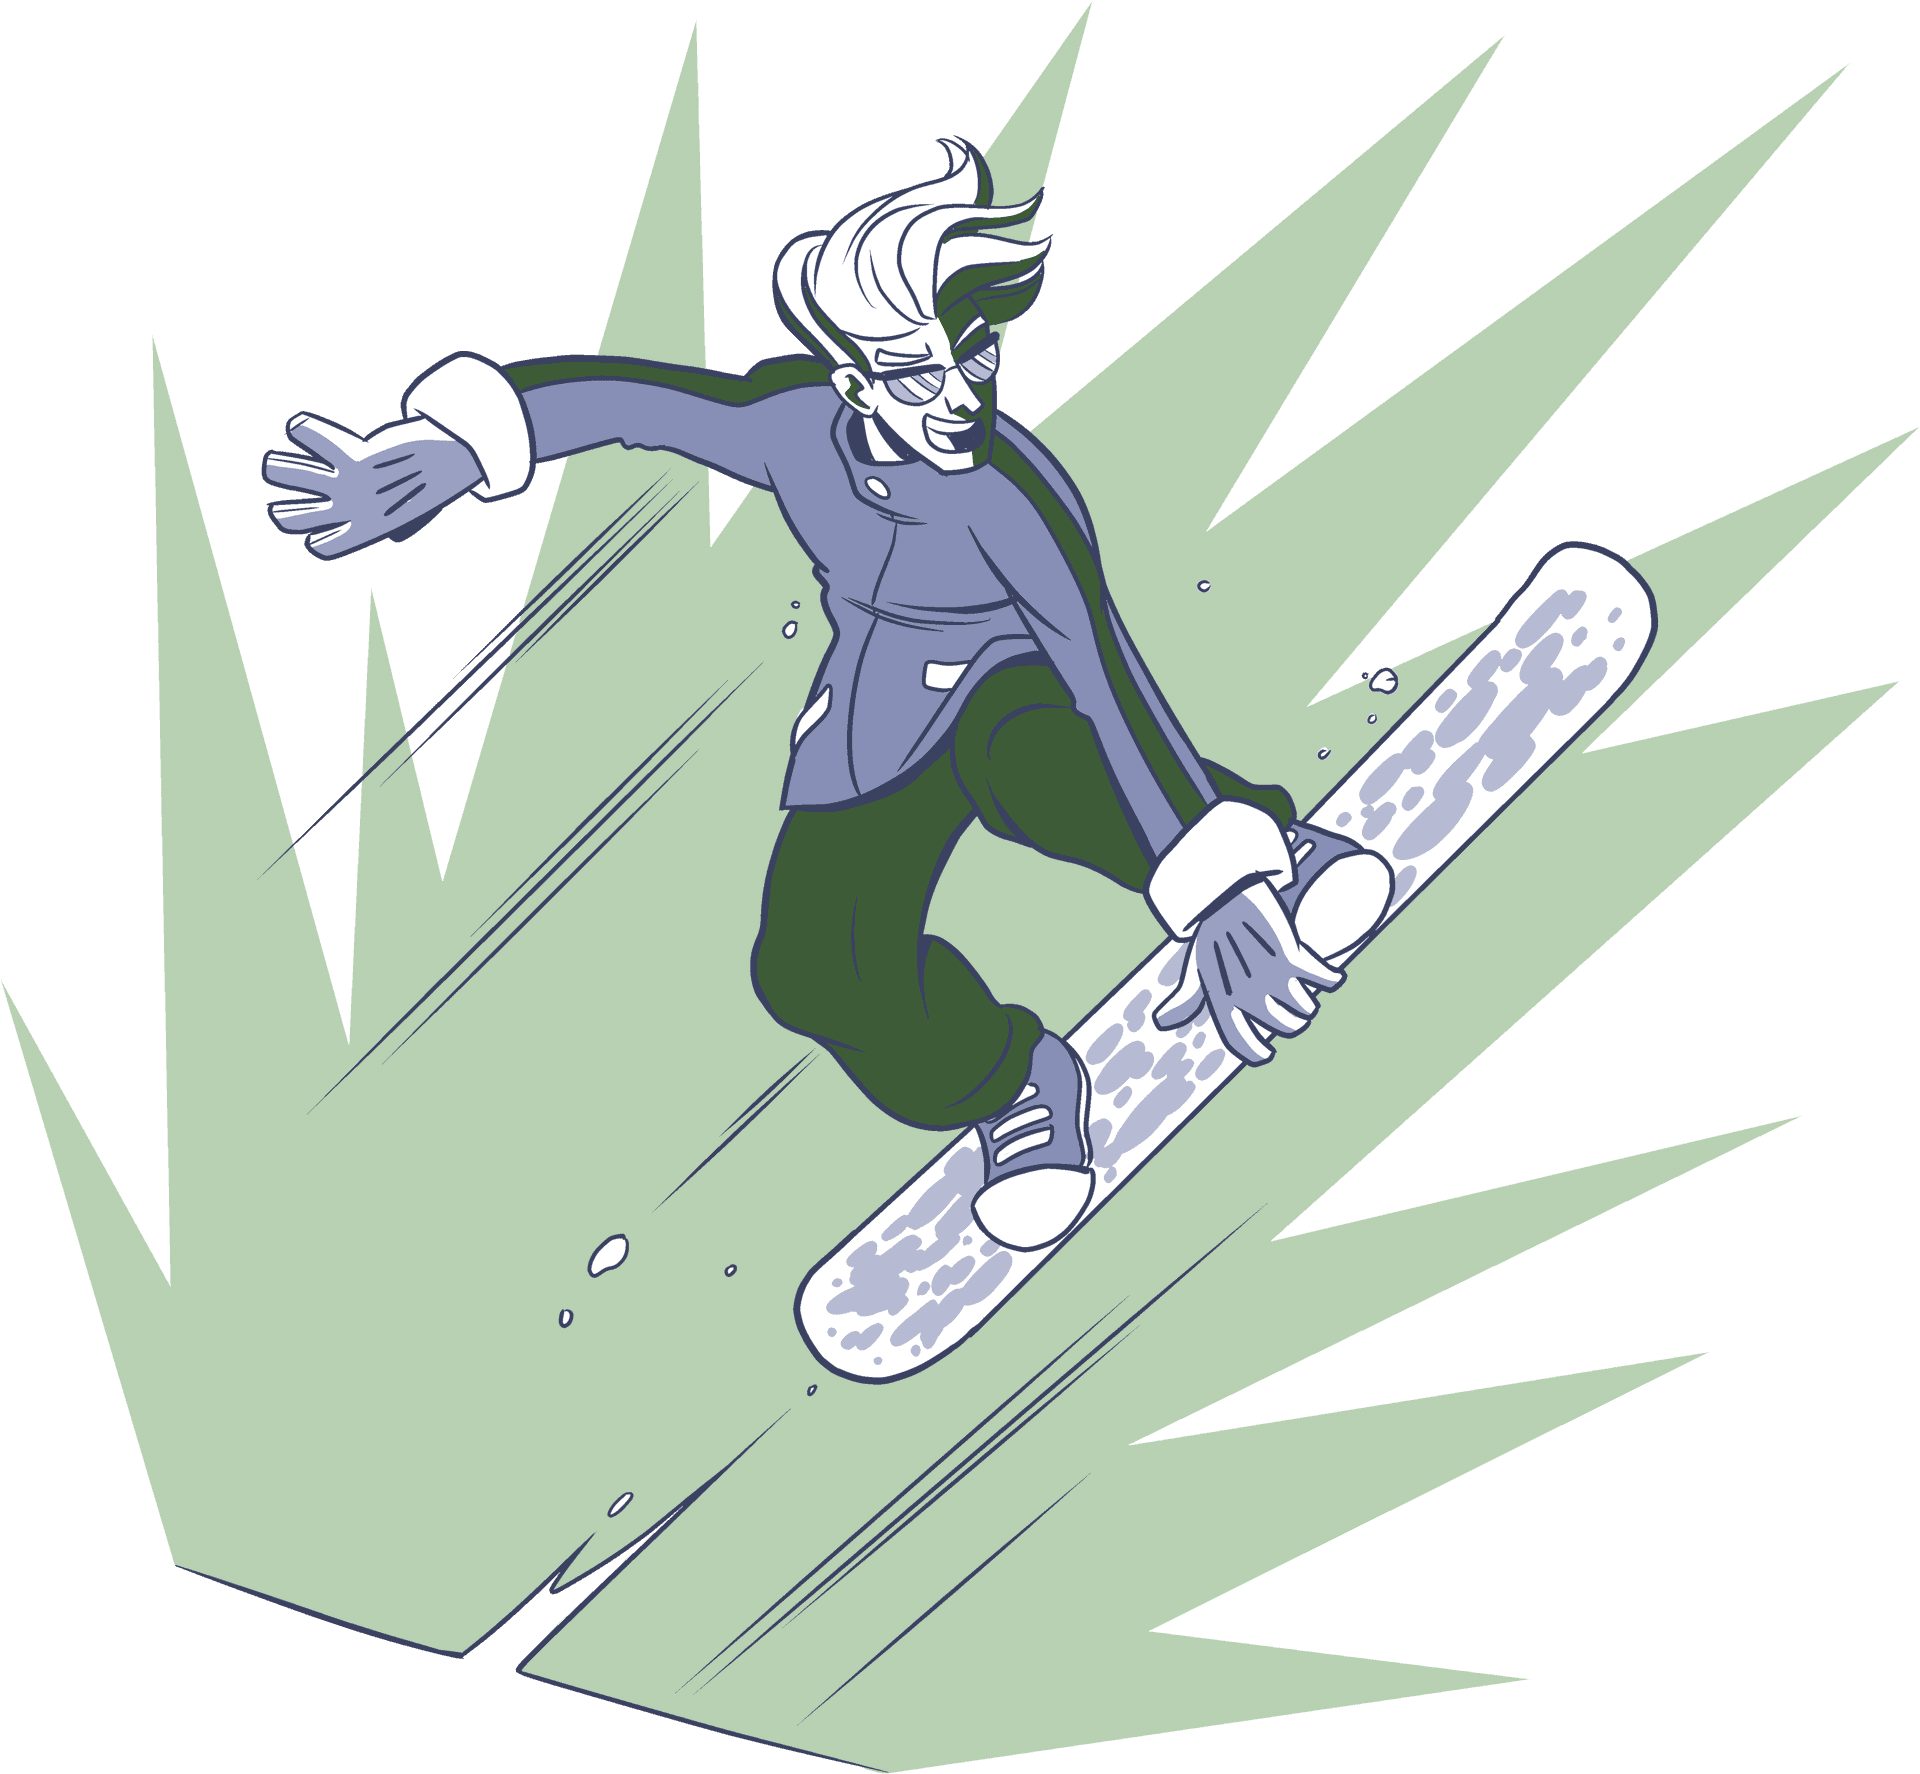 Animated Snowboarder Action Pose PNG